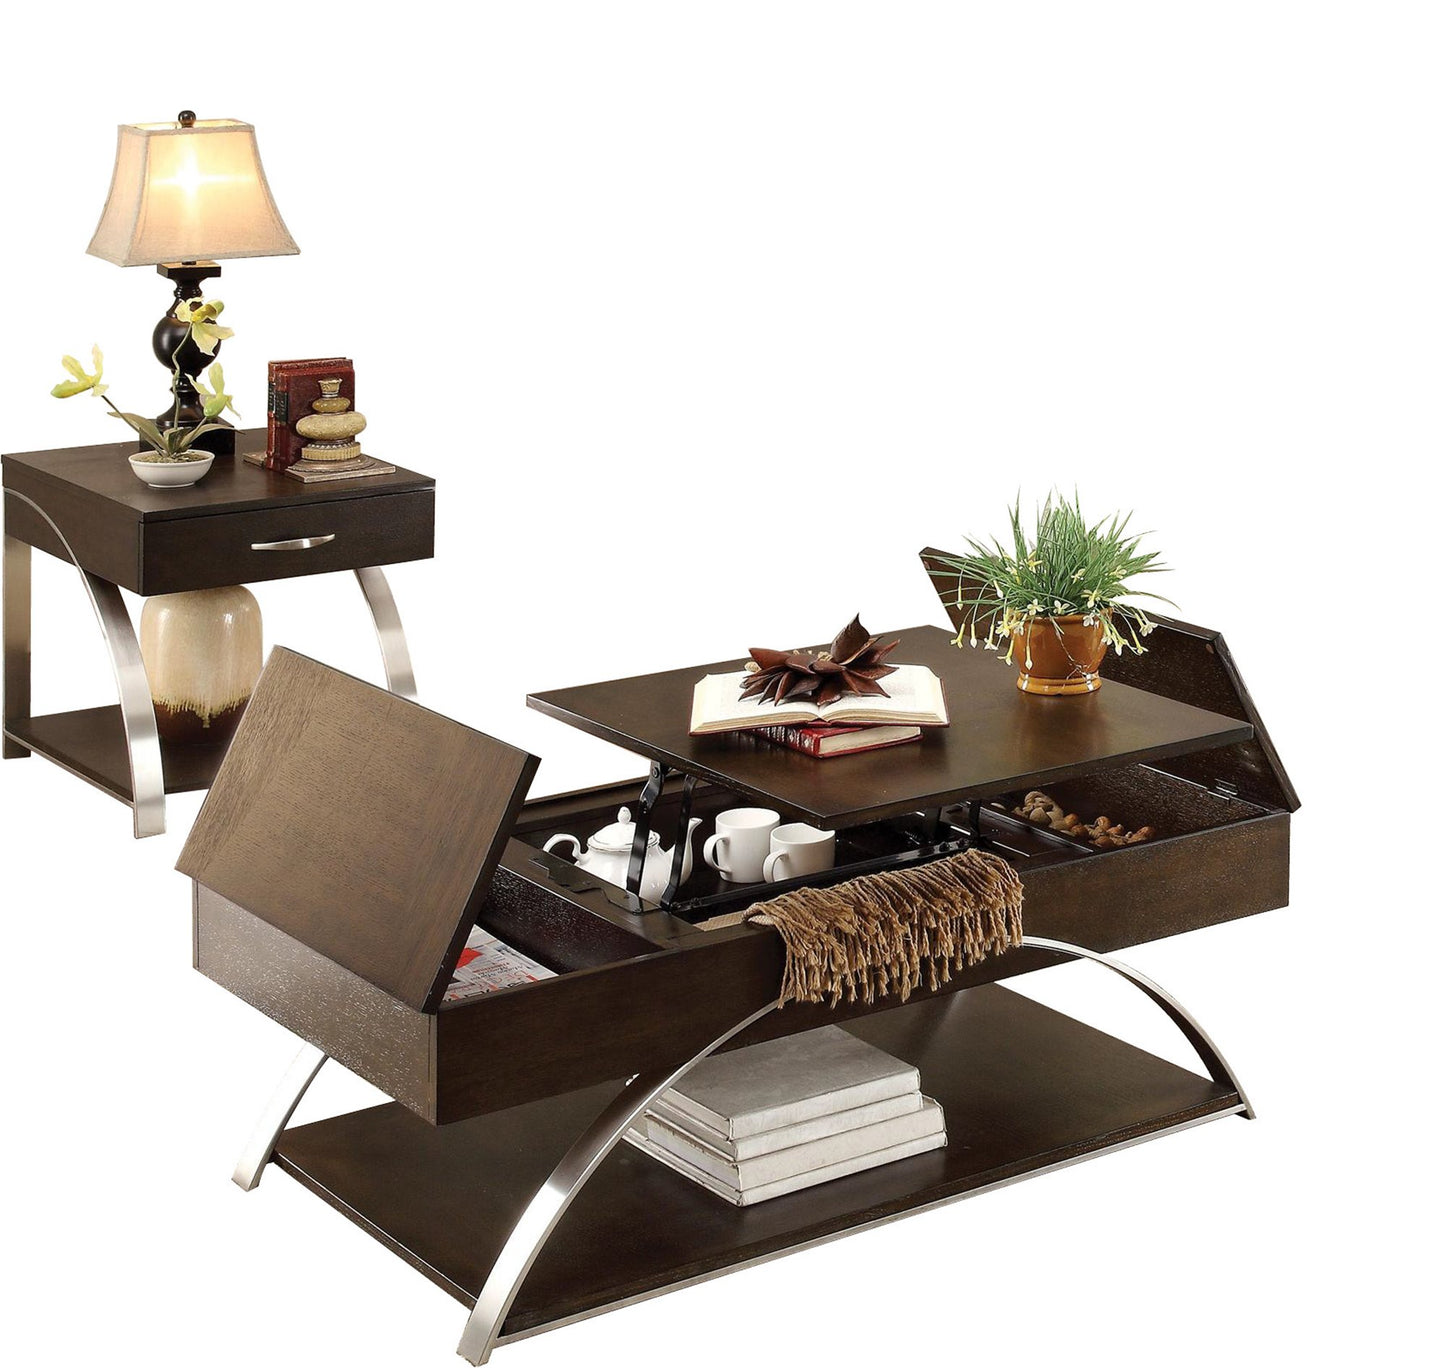 Homelegance Tioga 2PC Occasional Set Lift Top Cocktail Table with Storagen 1 End Table in Espresso